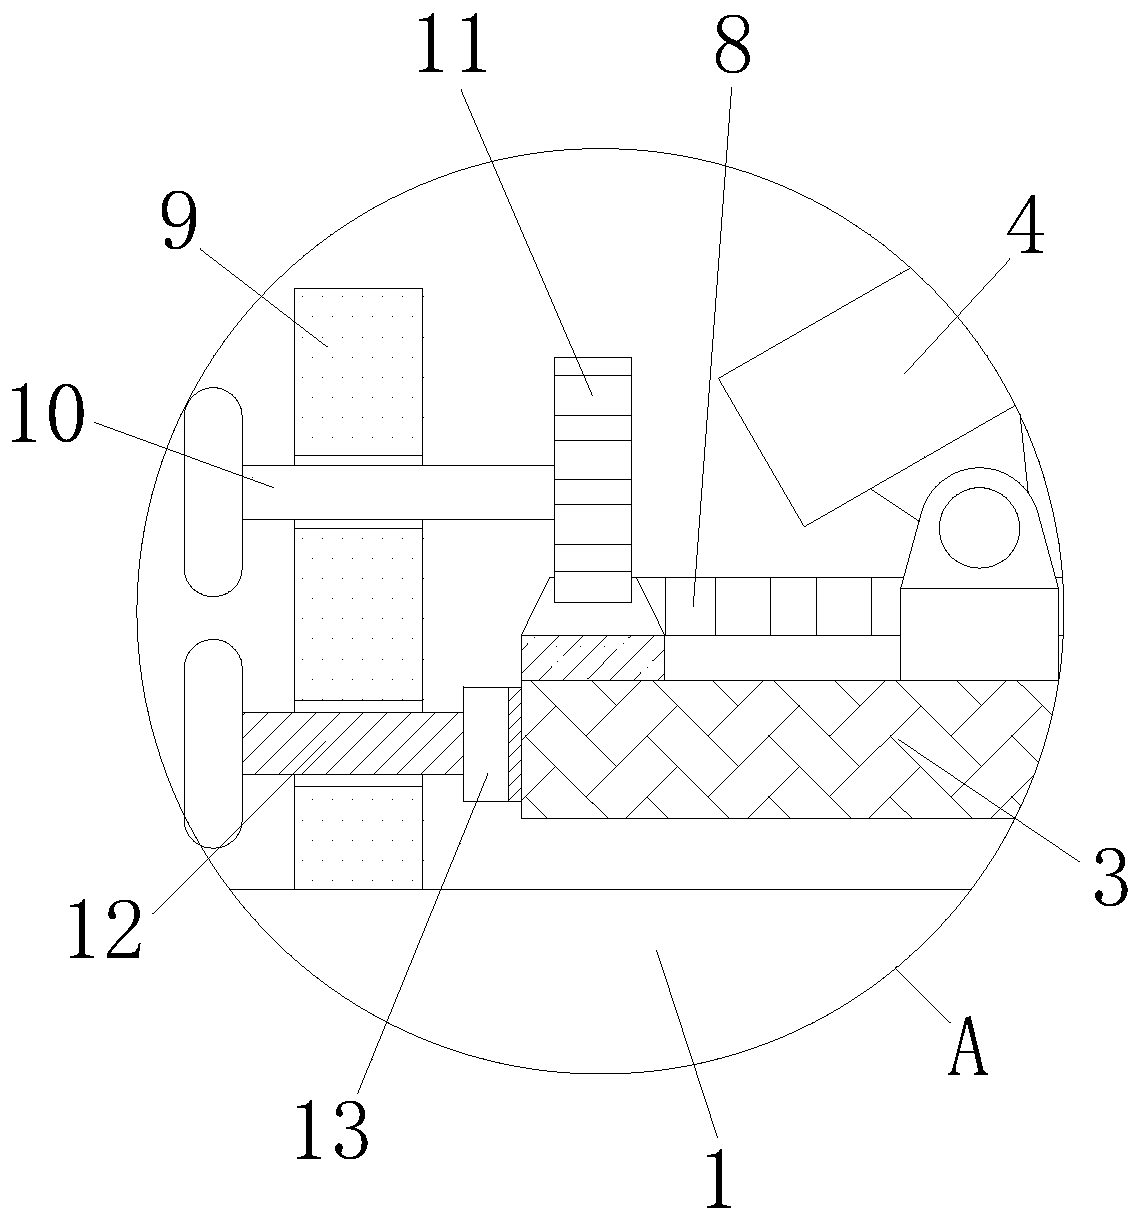 Pressure instrument housing equipped with solar panel seat